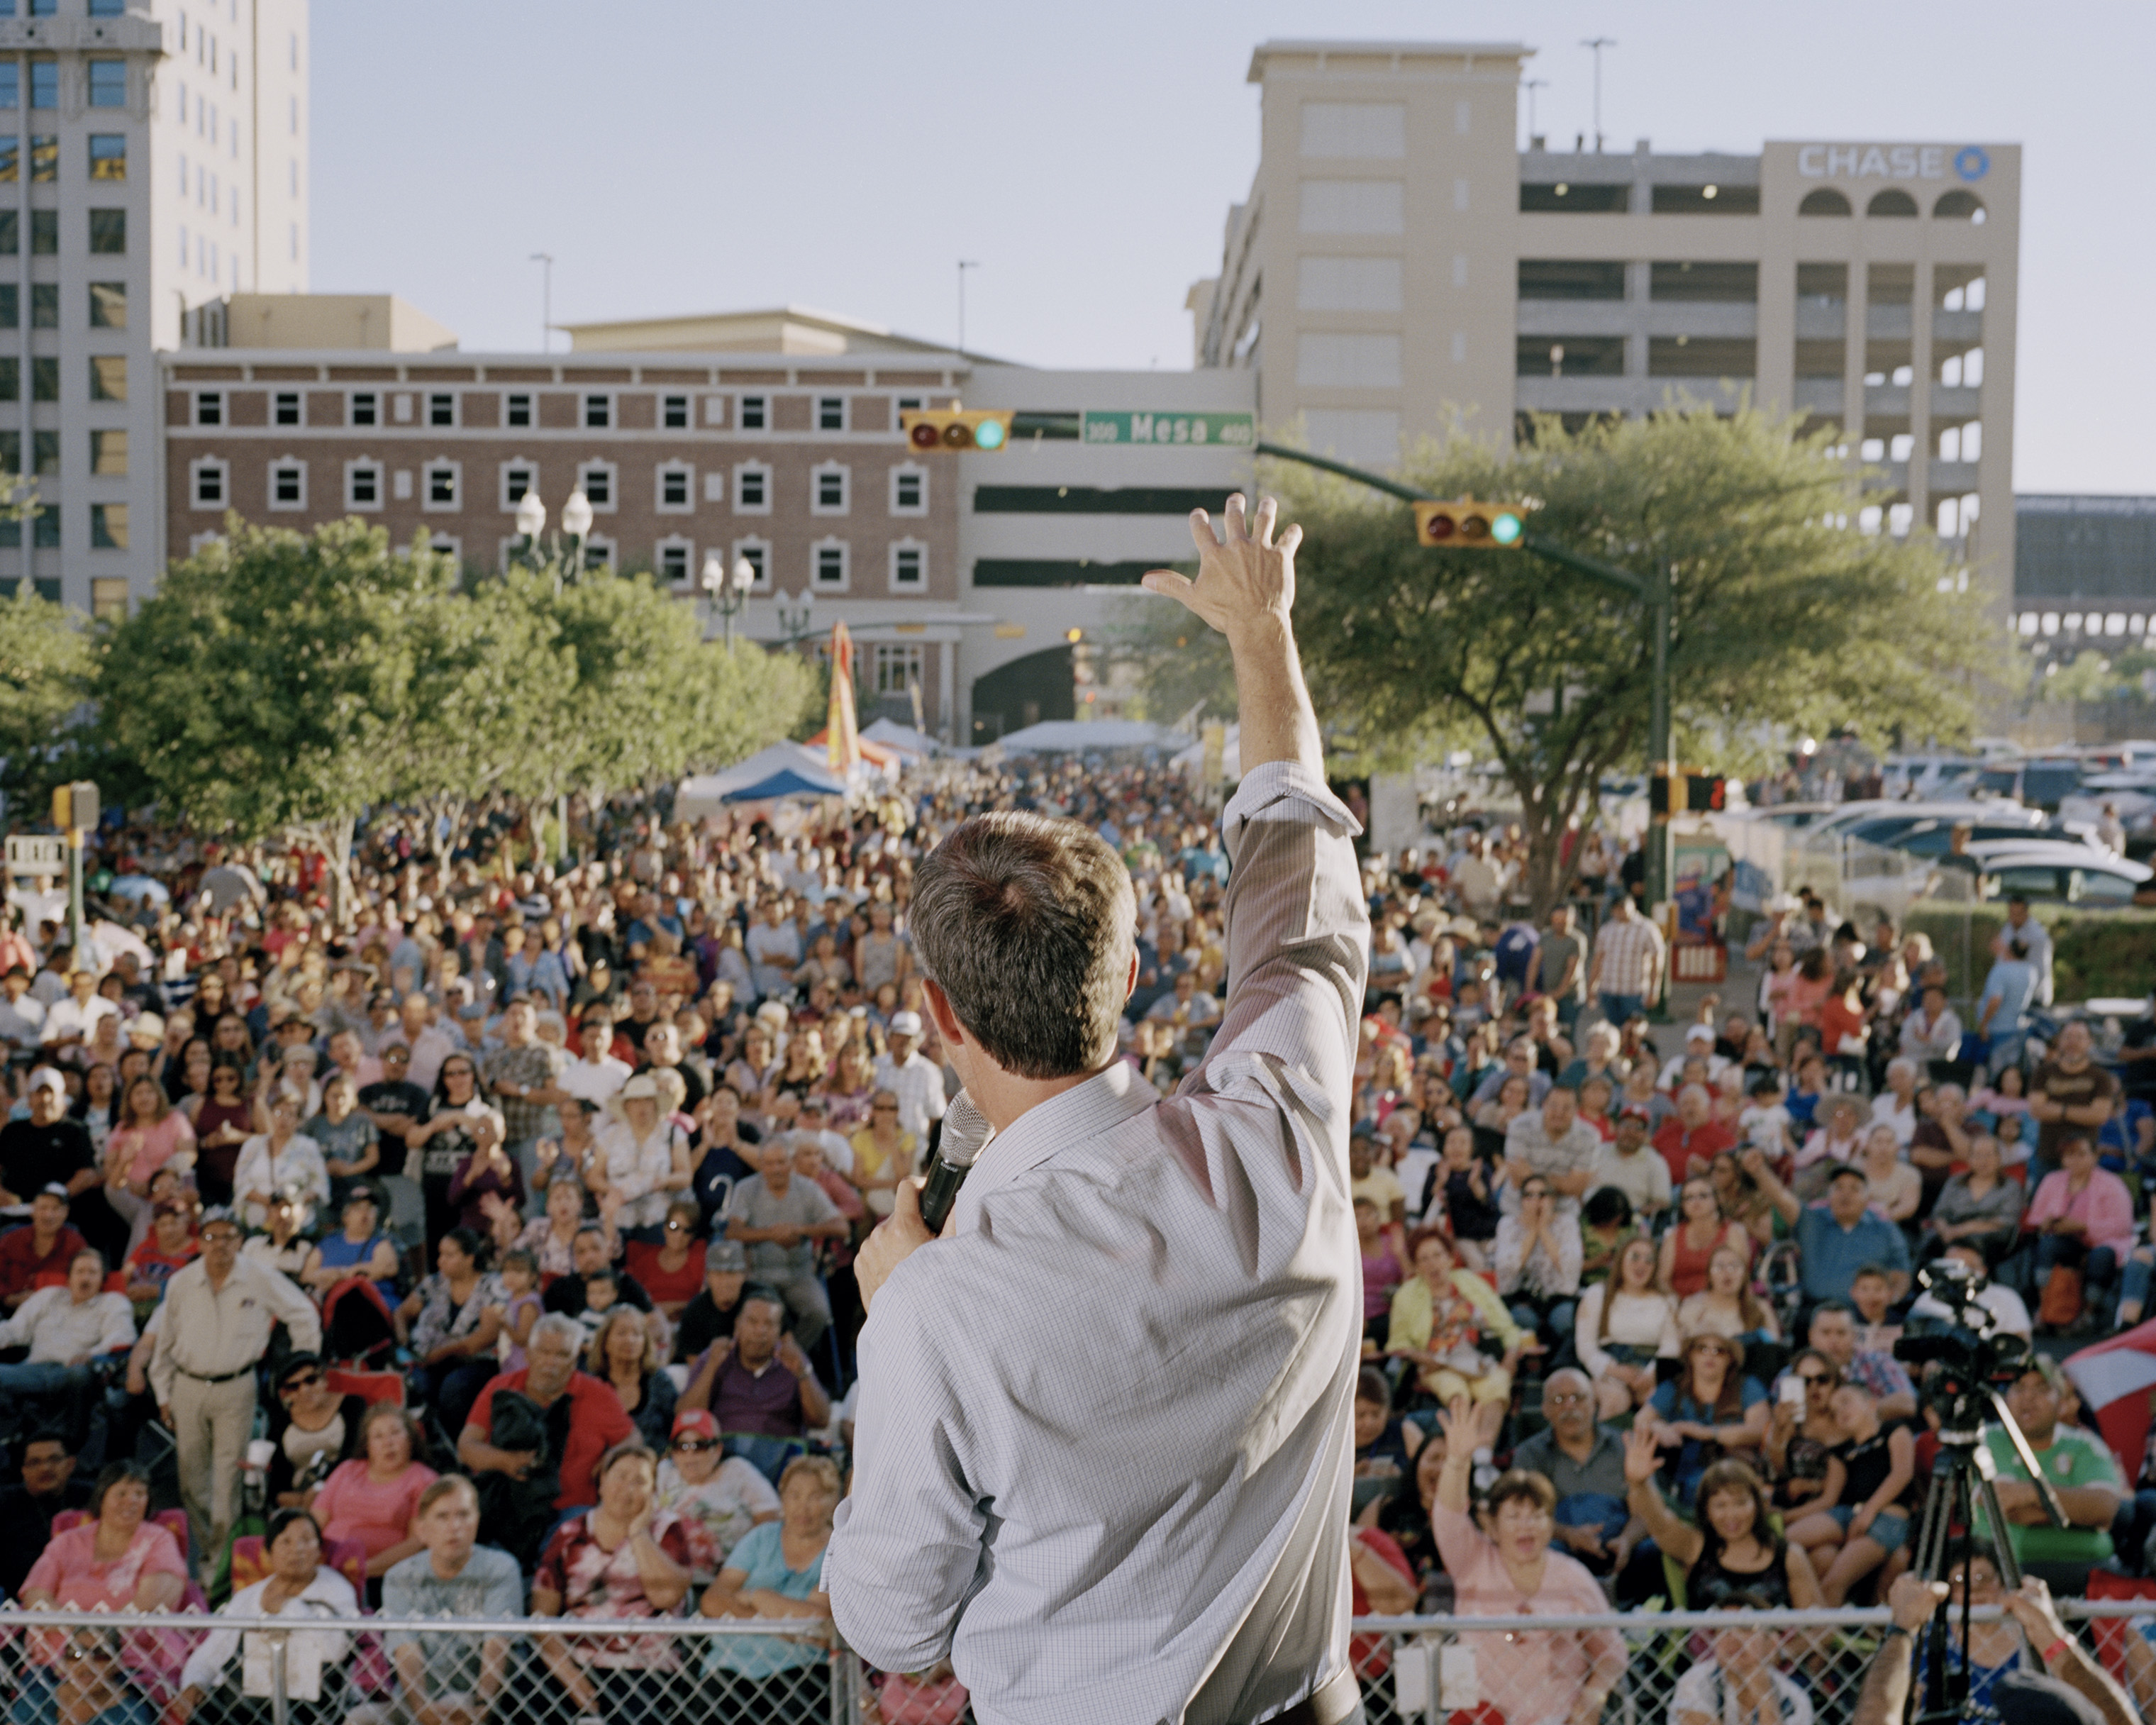 O'Rourke speaks to the crowd at the Mariachi Loco Music Festival in El Paso. (Benjamin Rasmussen for TIME)